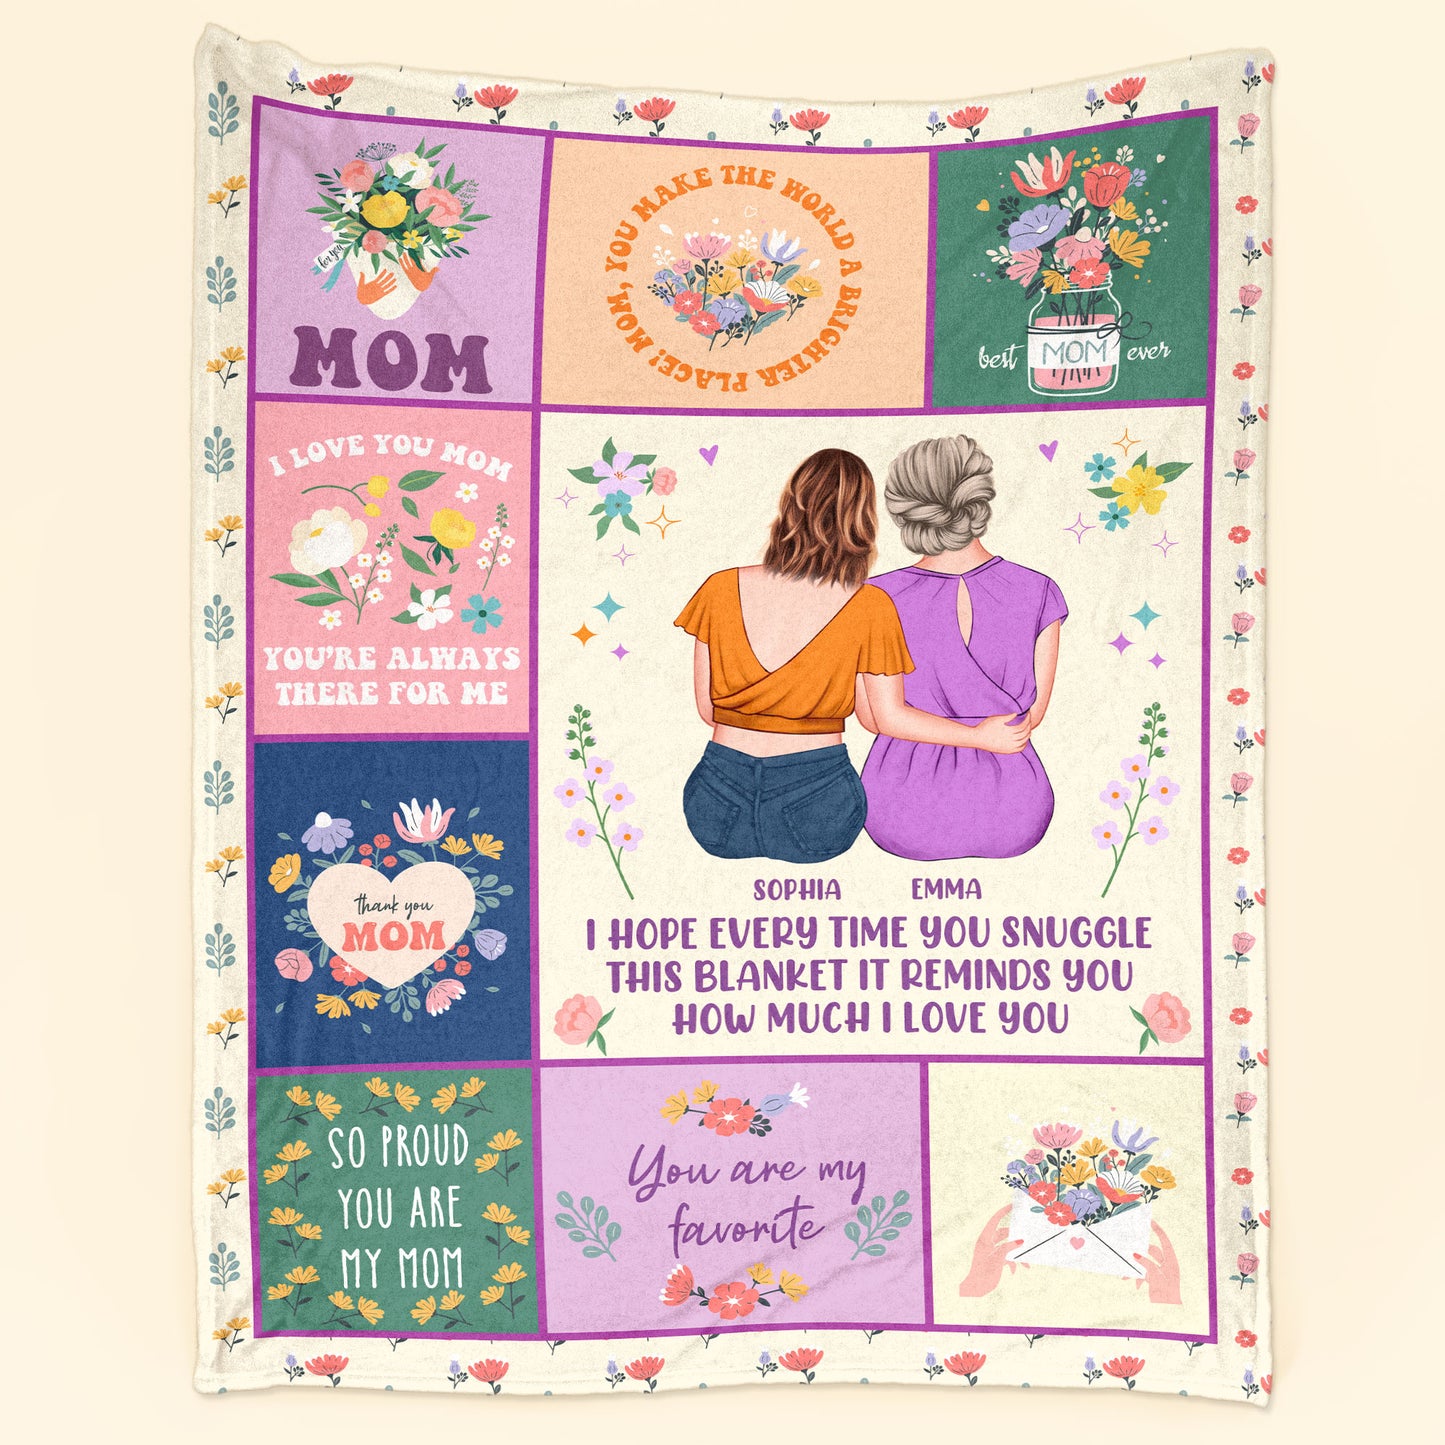 This Blanket Reminds You How Much I Love You Floral Patterns - Personalized Blanket